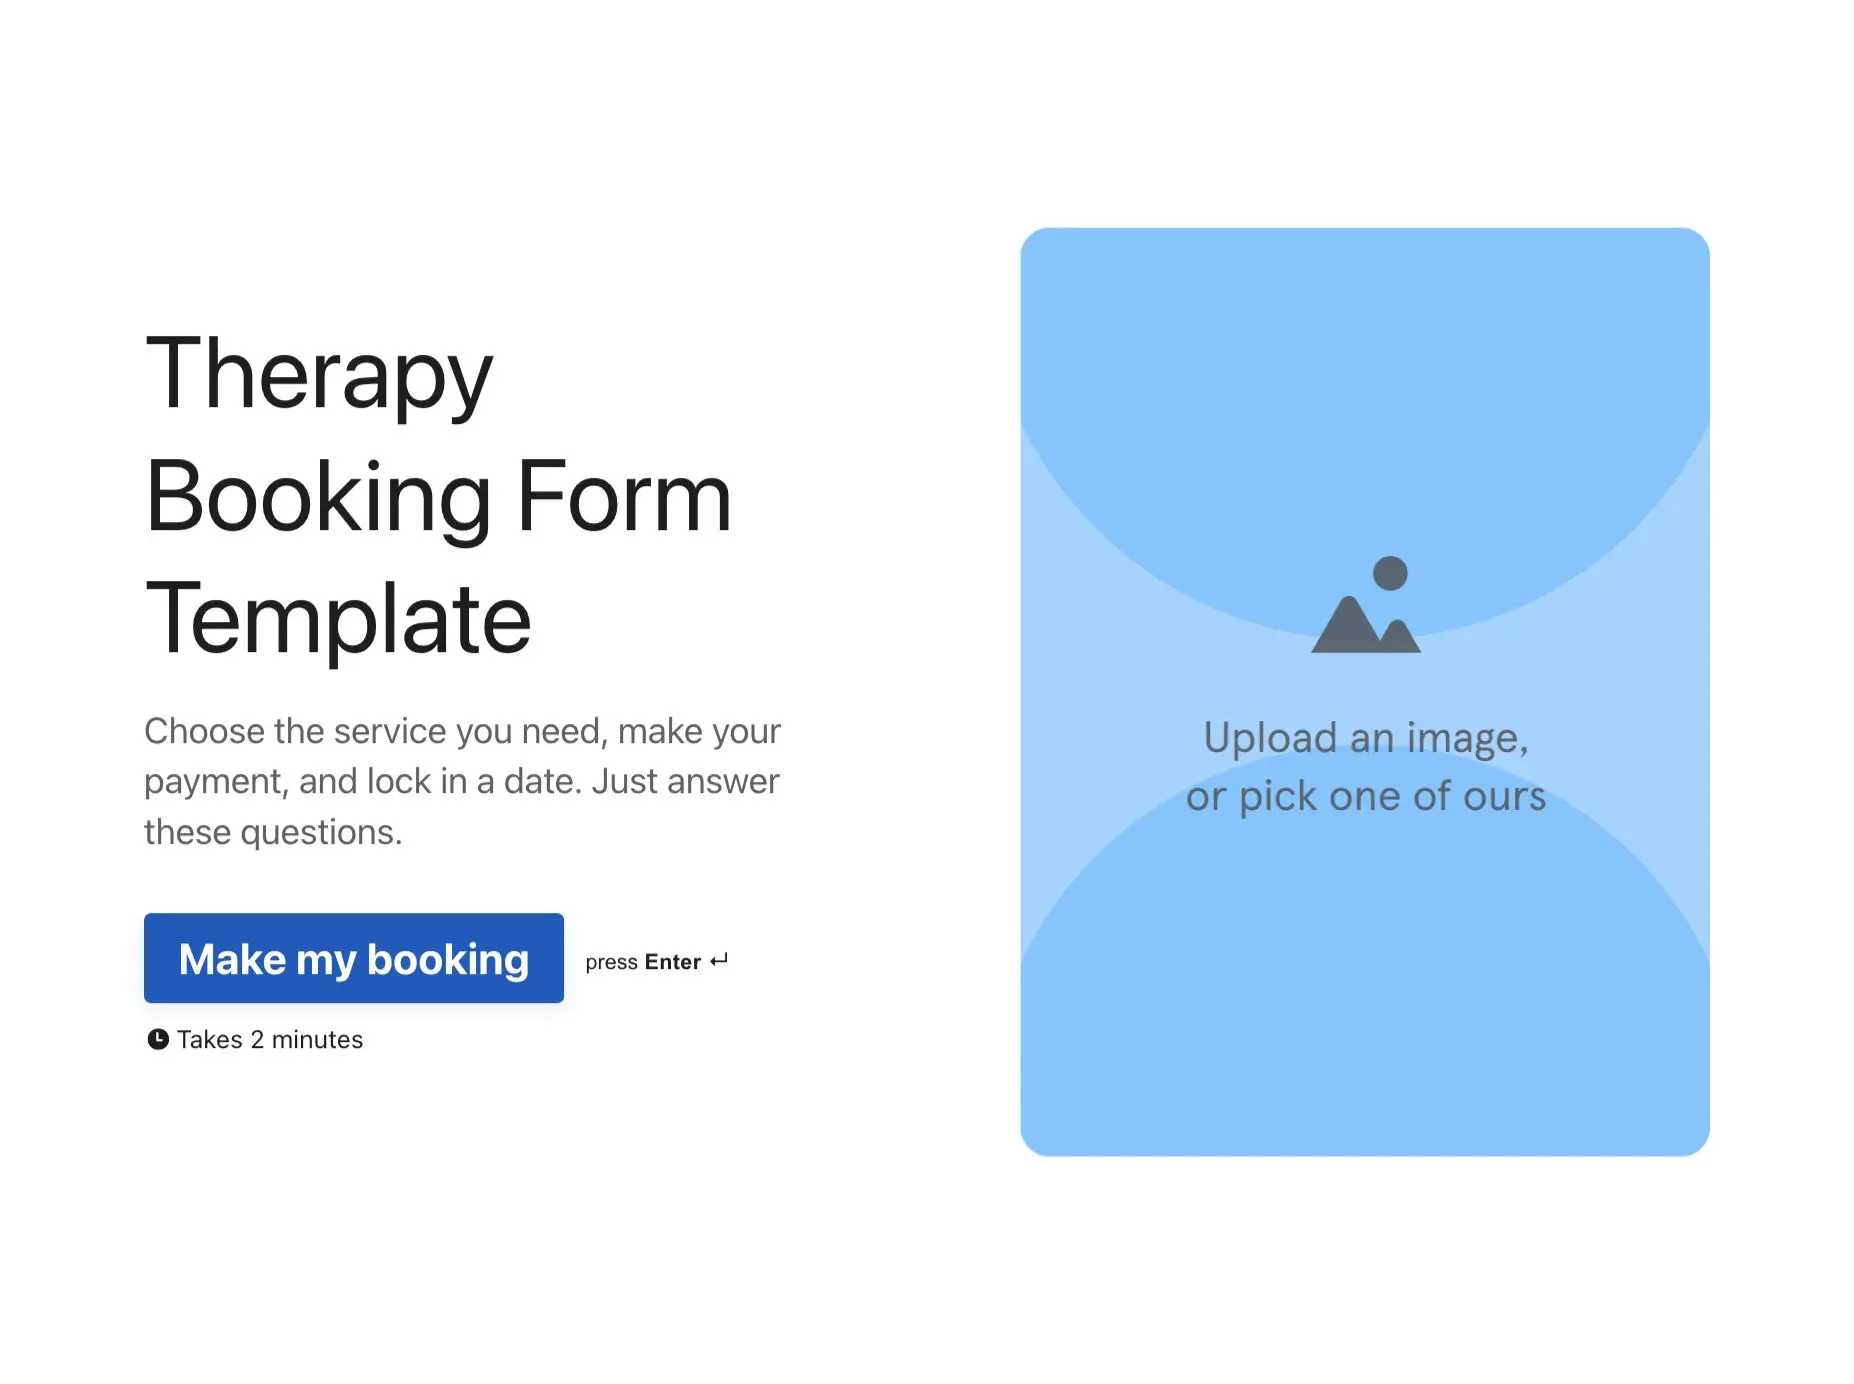 Therapy Booking Form Template Hero